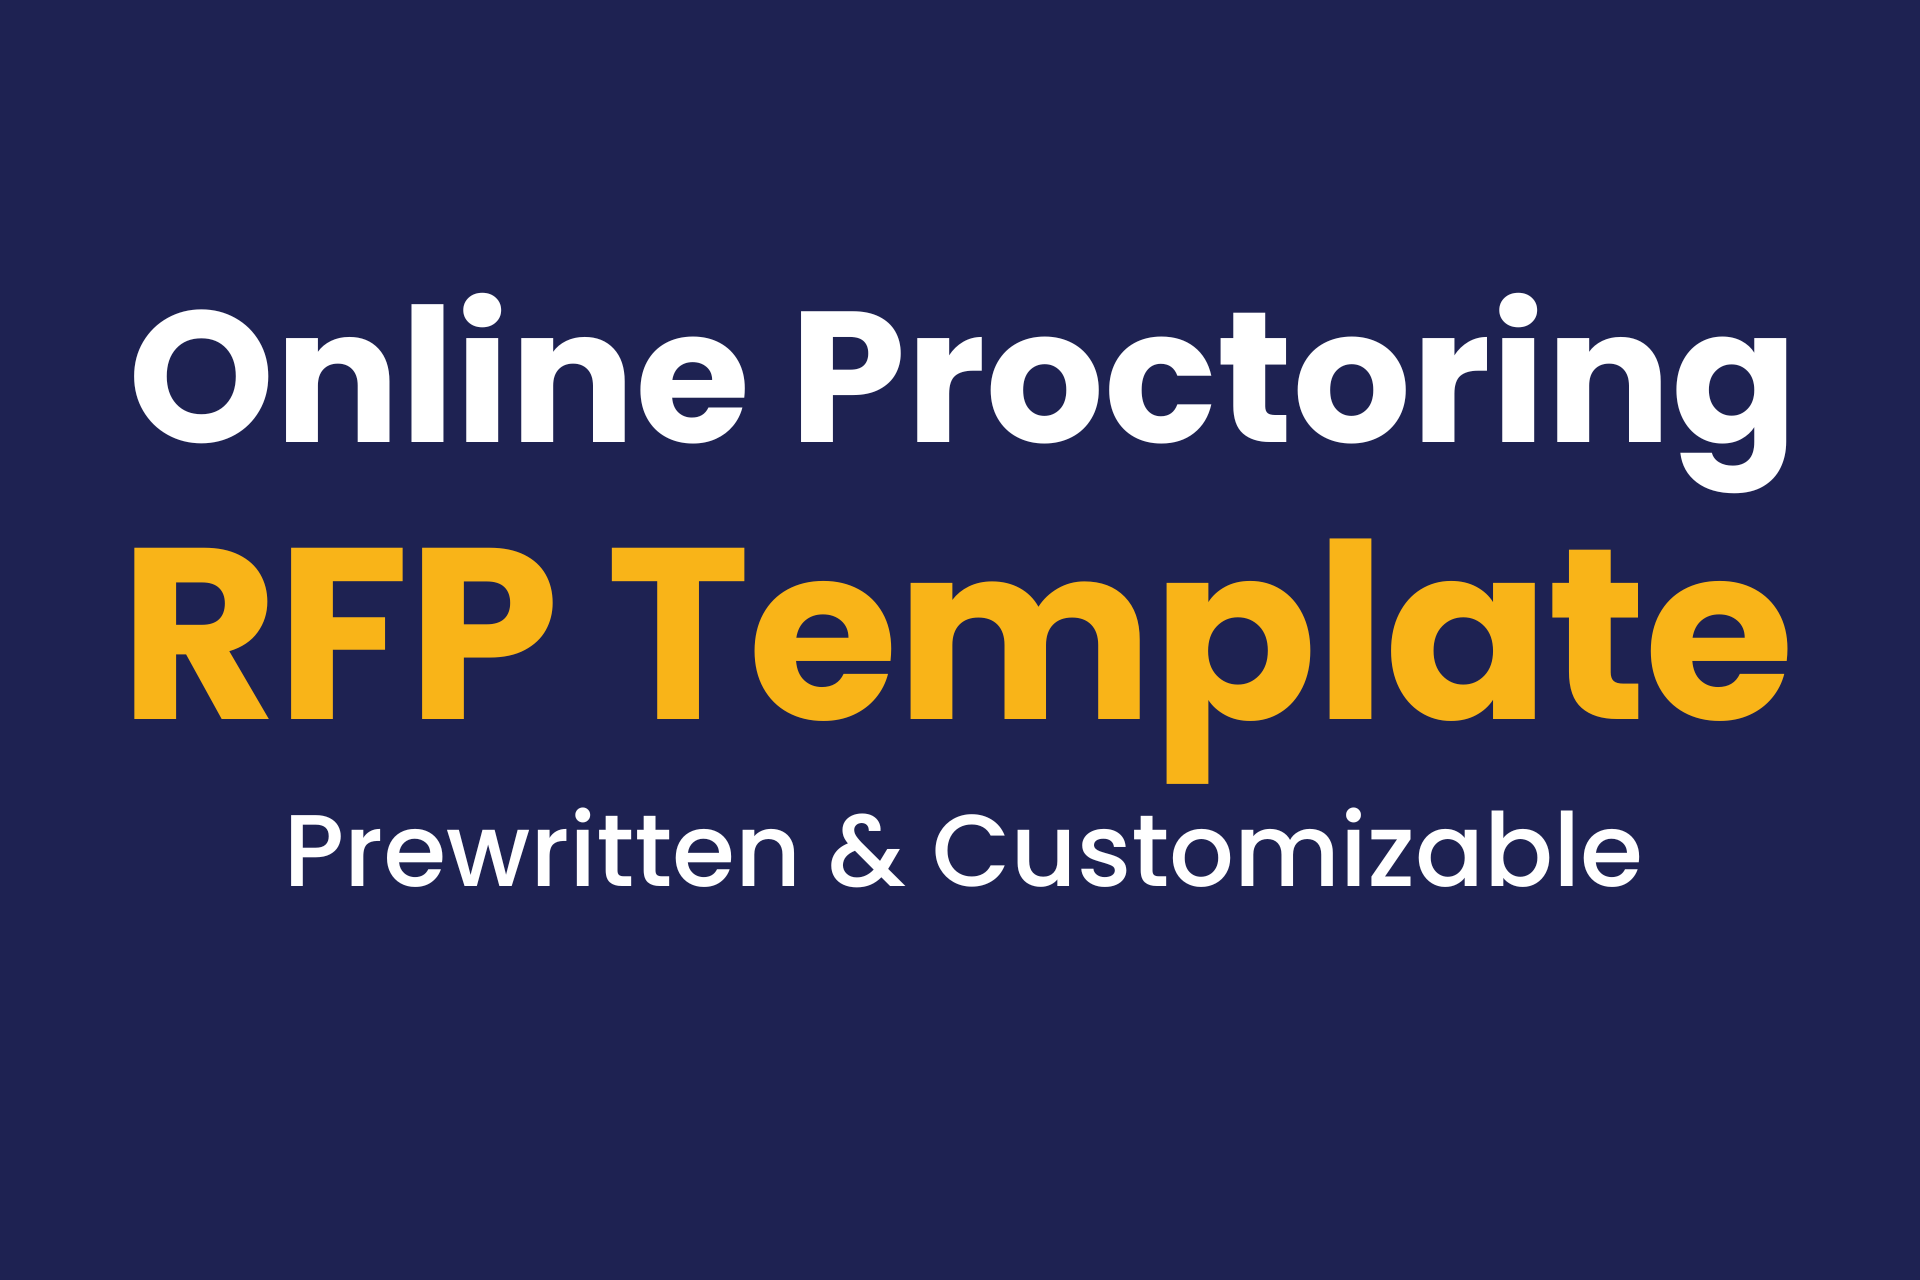 Download the online proctoring services RFP template to save time and find the right solution.